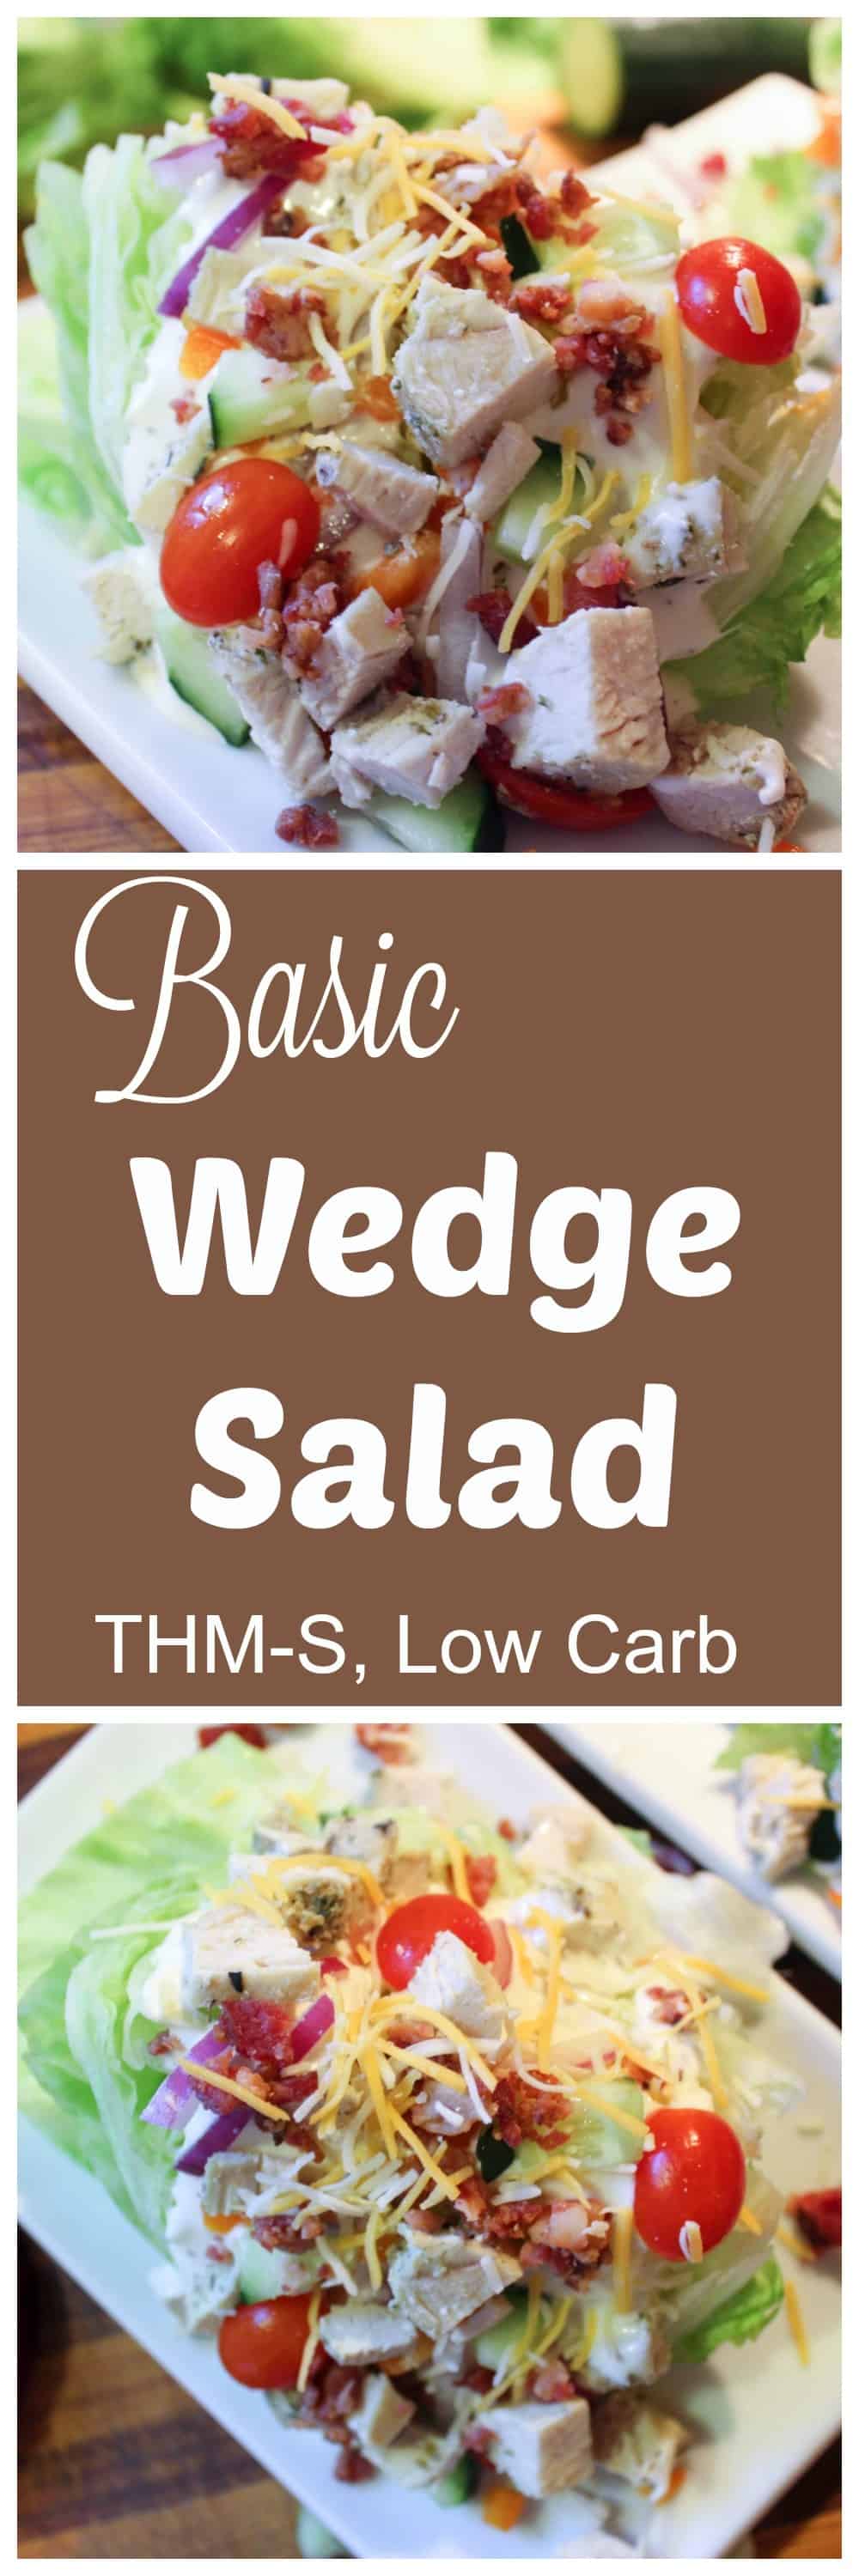 Basic Wedge Salad (THM-S, Low Carb)